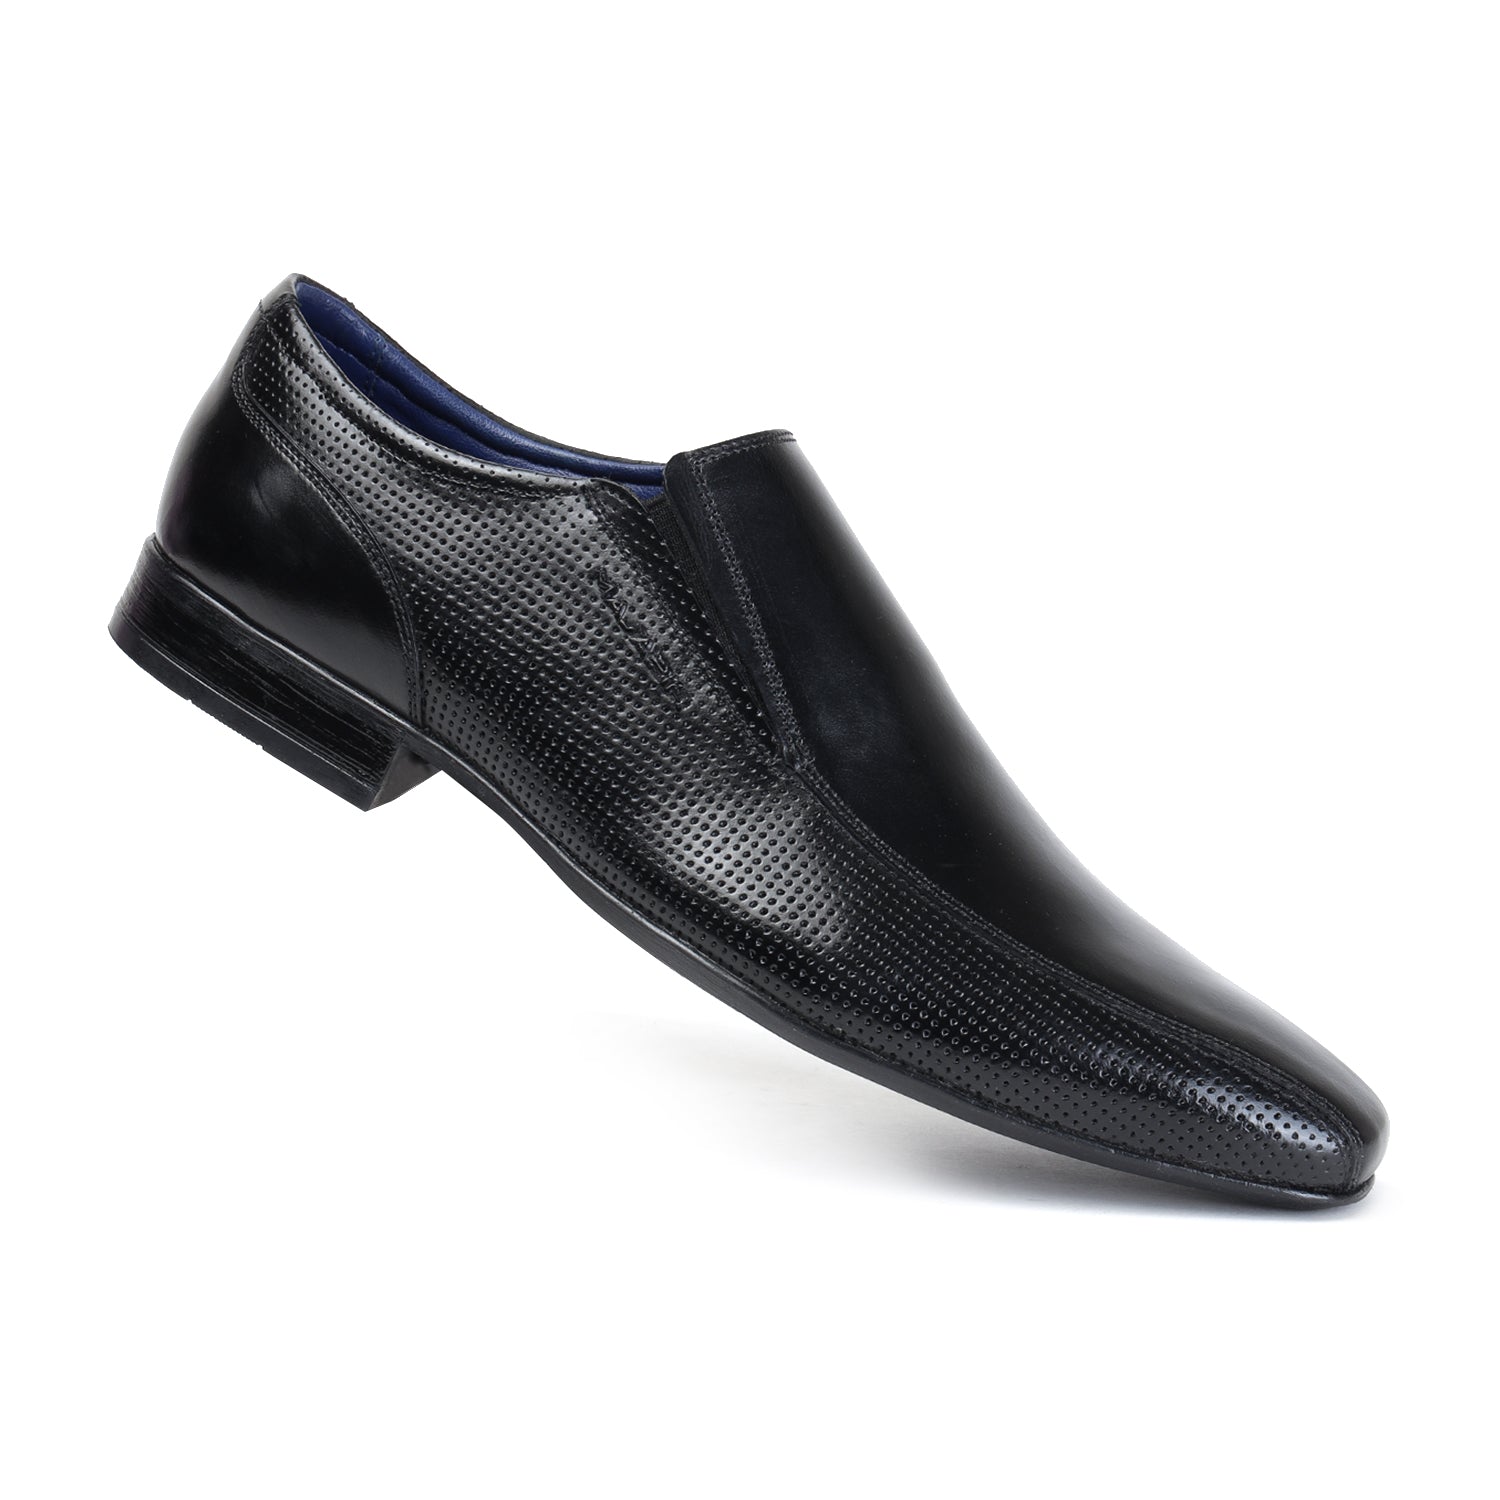 MASABIH GENUINE LEATHER BLACK CASUAL LOAFER SHOES FOR MEN